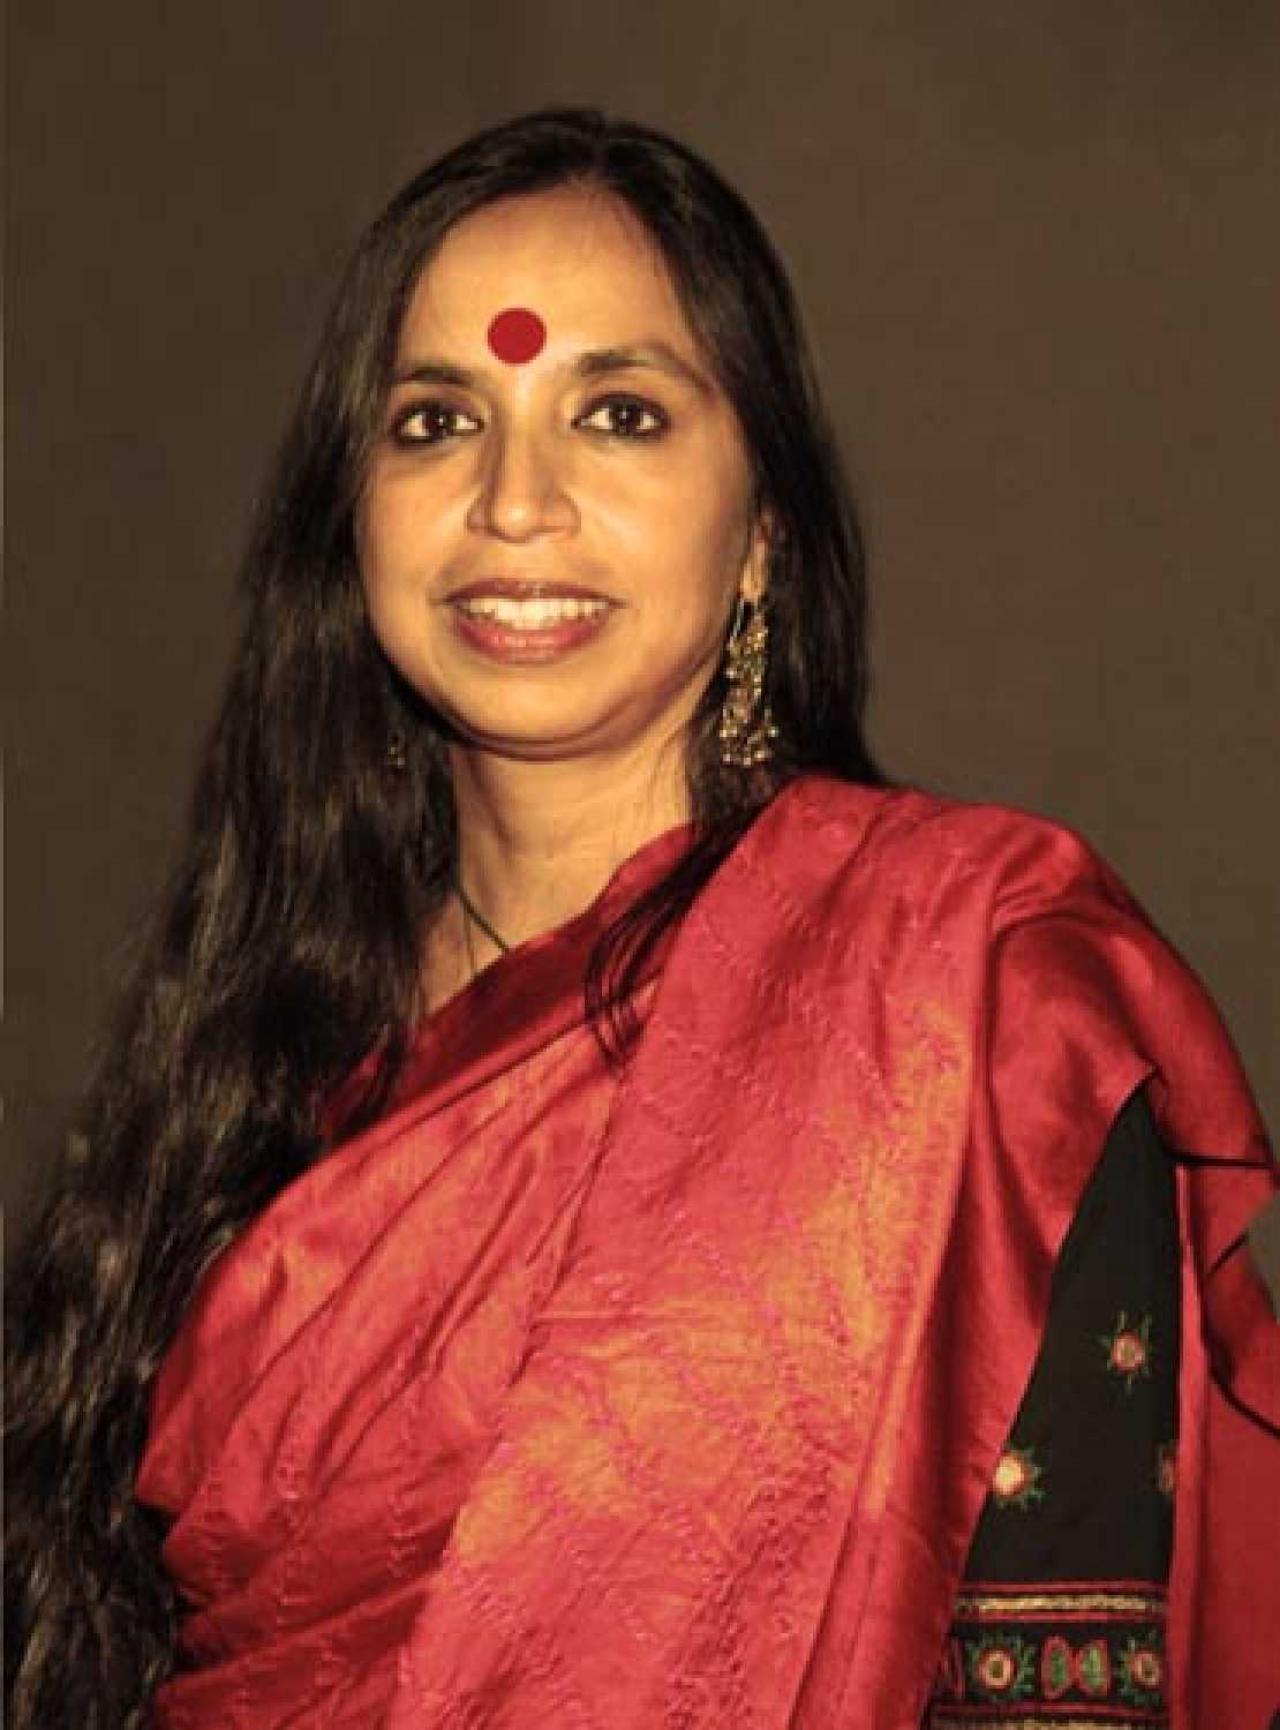 Shonali Bose is a highly acclaimed Indian filmmaker and writer who has made a significant impact on the Indian film industry. She is known for her ability to craft powerful stories that are both emotionally resonant and socially relevant. Shonali's most notable work includes her films 'Amu', 'Margarita with a Straw', and 'The Sky Is Pink'. Her films tackle sensitive subjects such as disability, identity, and social justice, and they have won numerous awards and critical acclaim. In addition to her work as a filmmaker, Shonali is also an accomplished writer. Her scripts are characterized by their authenticity, sensitivity, and emotional depth.